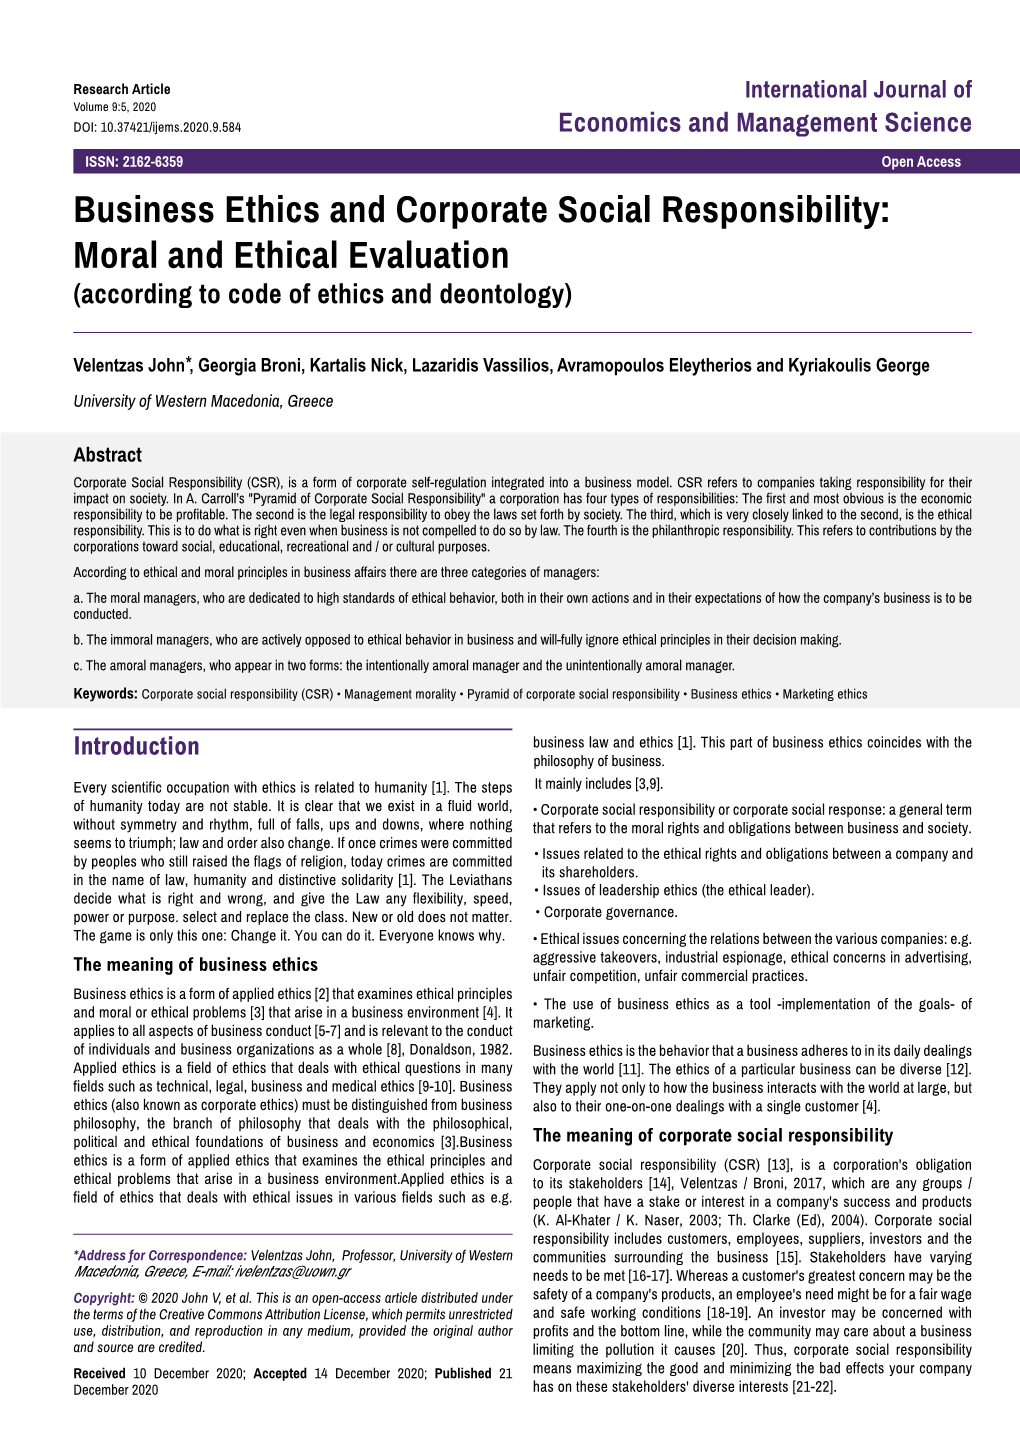 Business Ethics and Corporate Social Responsibility: Moral and Ethical Evaluation (According to Code of Ethics and Deontology)